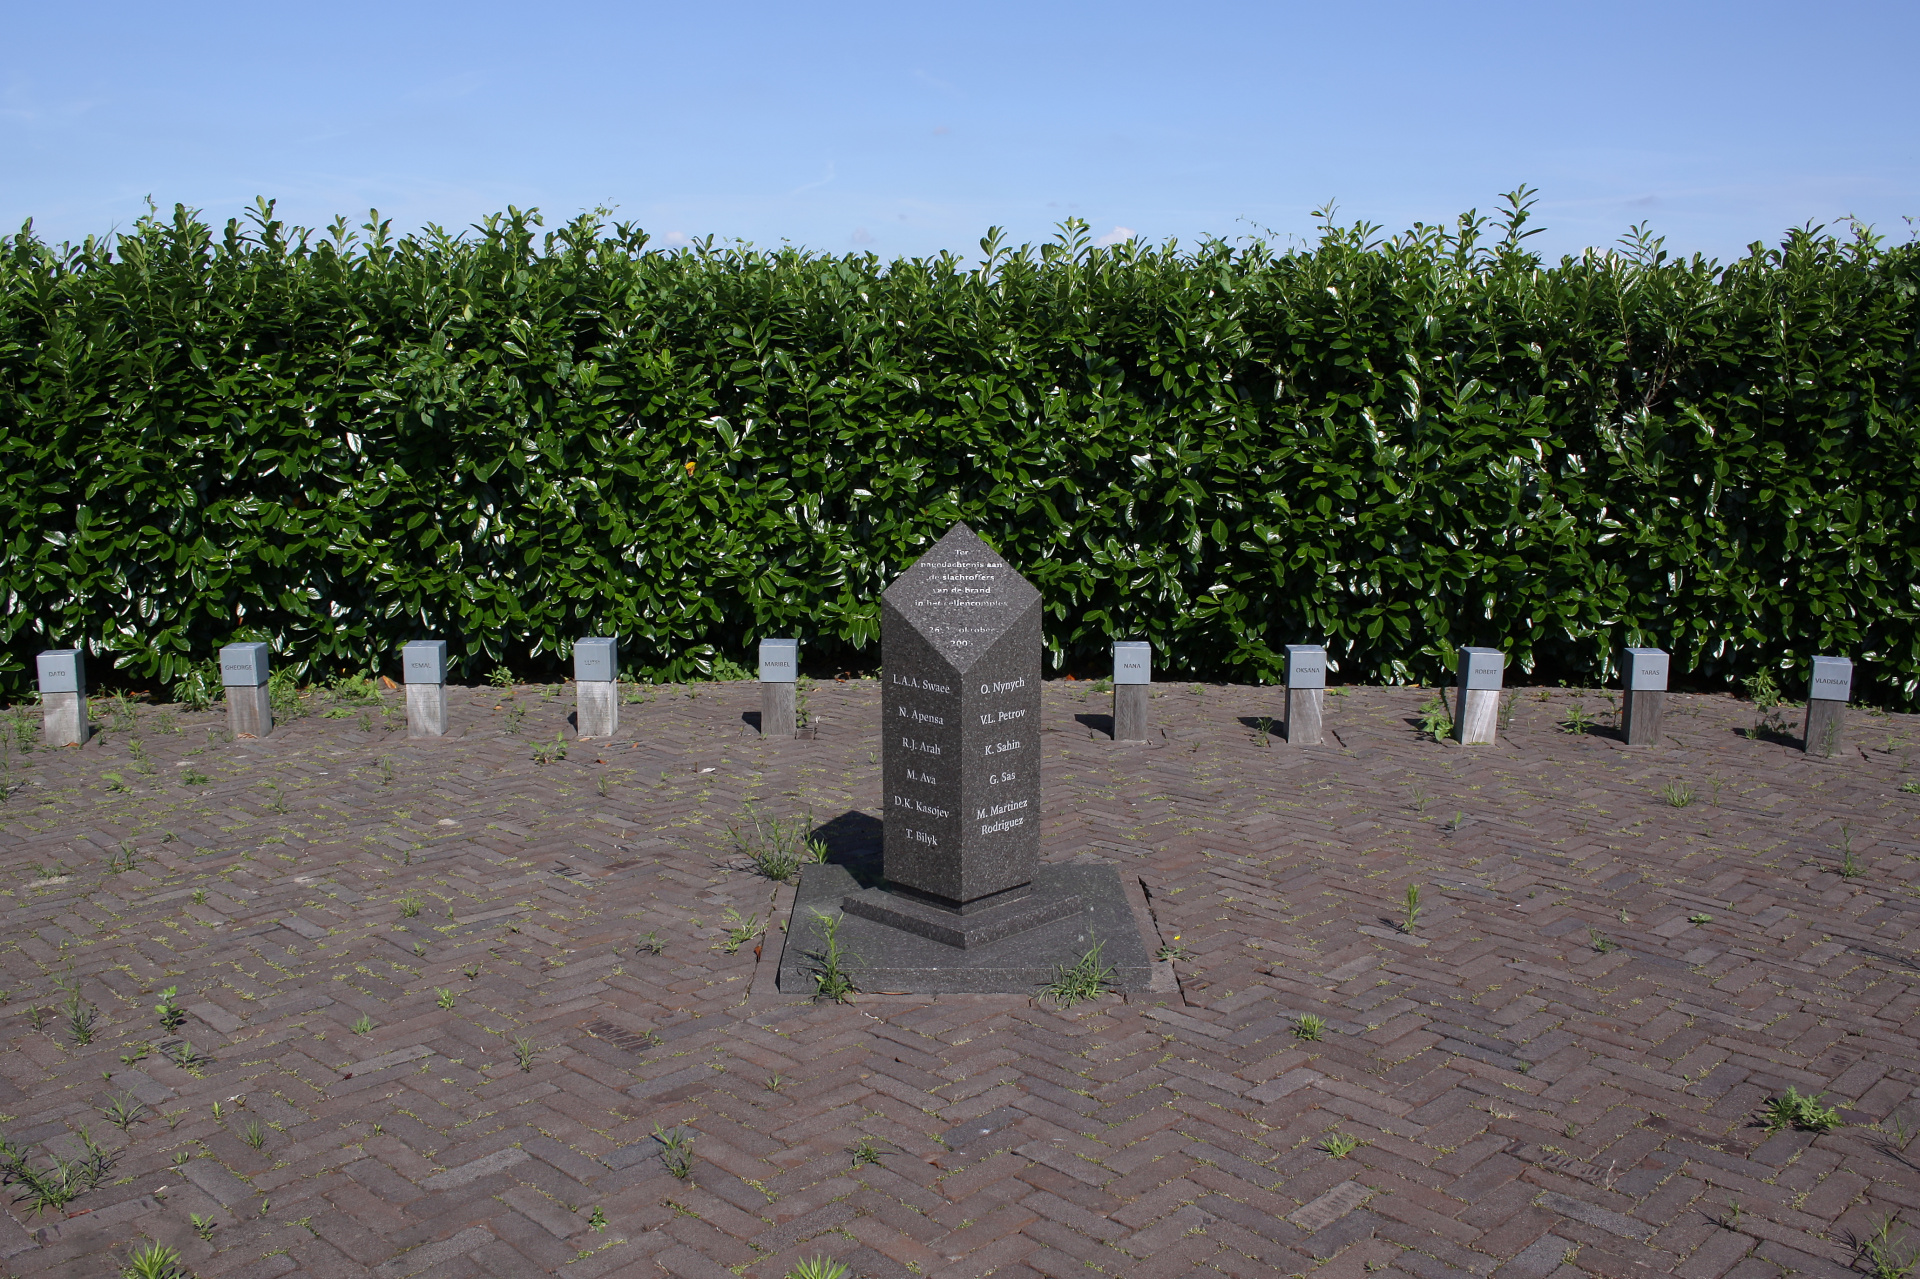 Schiphol-Oost Detention Centre Fire Memorial (Travels » Amsterdam)